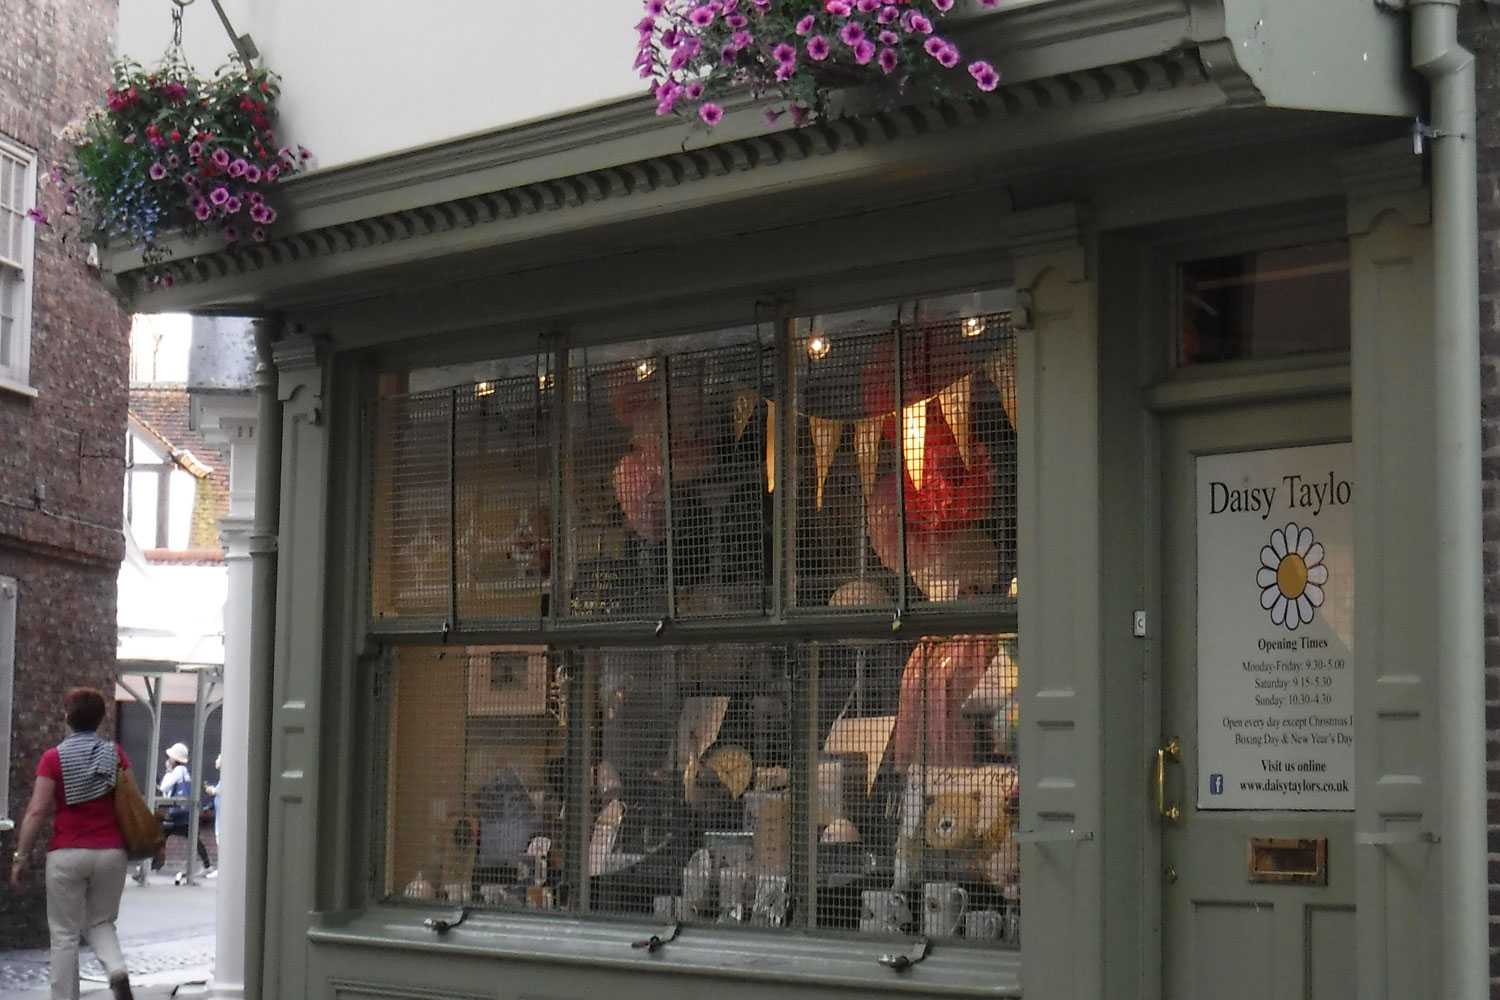 Daisy Taylor's gift shop off Kings Square in York City Centre